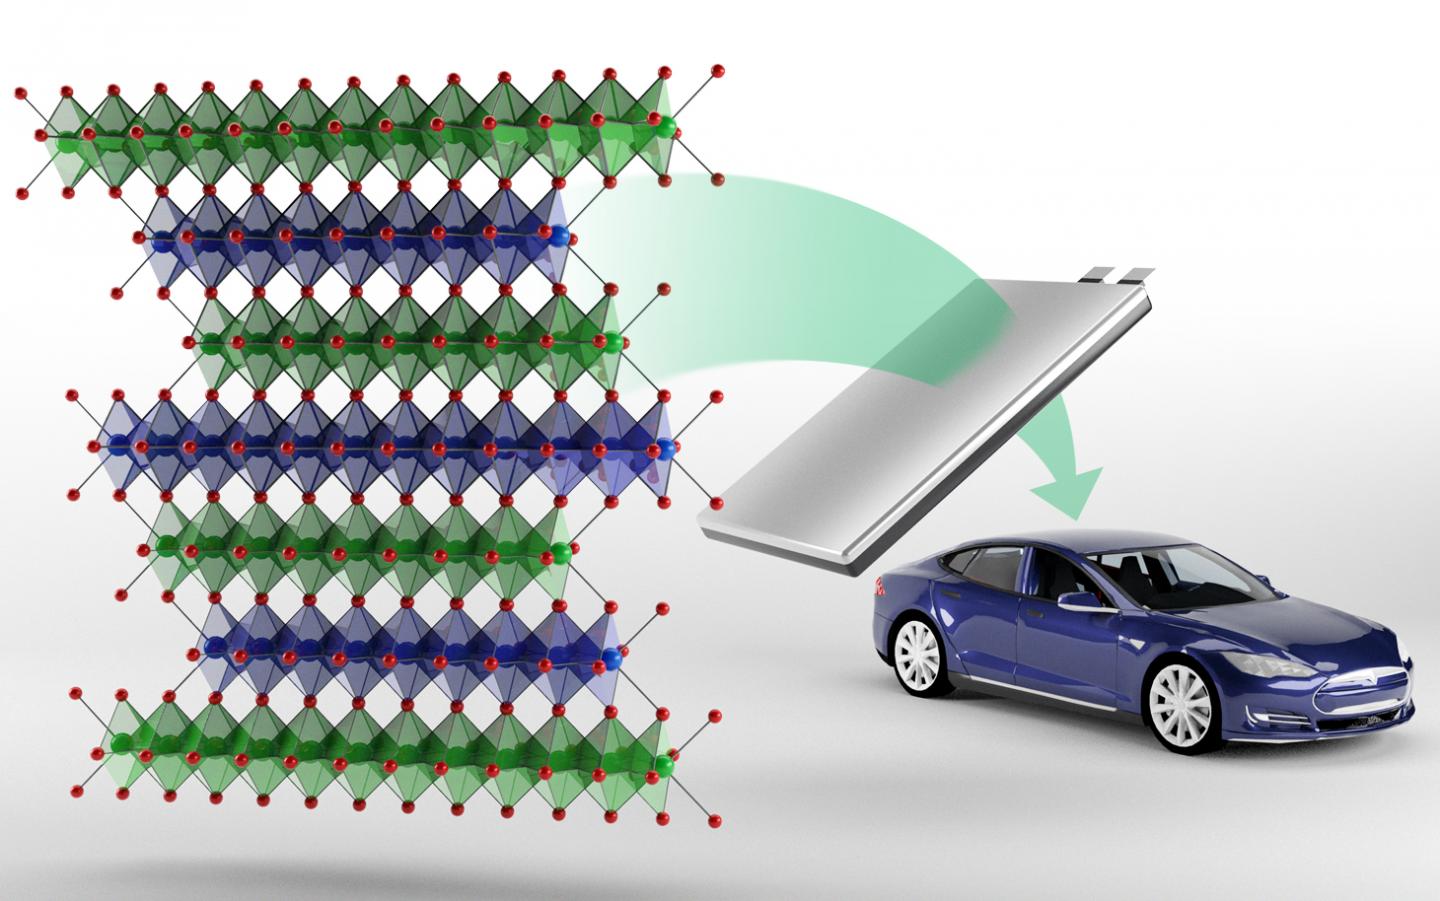 New Class Of Cobalt-Free Cathodes Could Enhance Energy Density Of Next-Gen Lithium-Ion Batteries